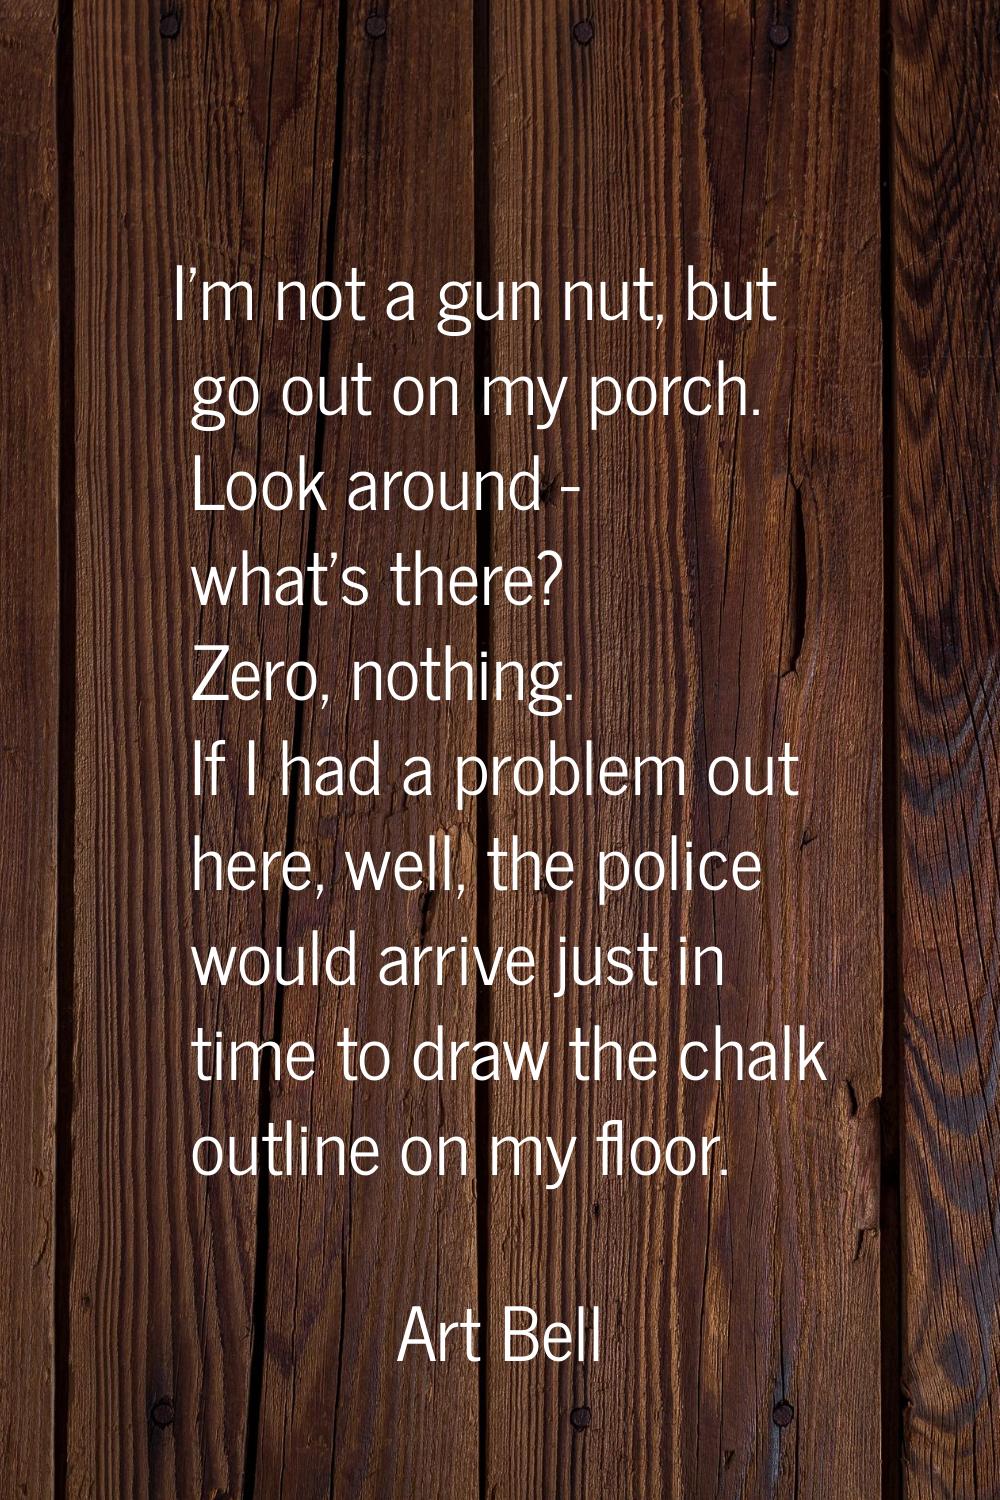 I'm not a gun nut, but go out on my porch. Look around - what's there? Zero, nothing. If I had a pr